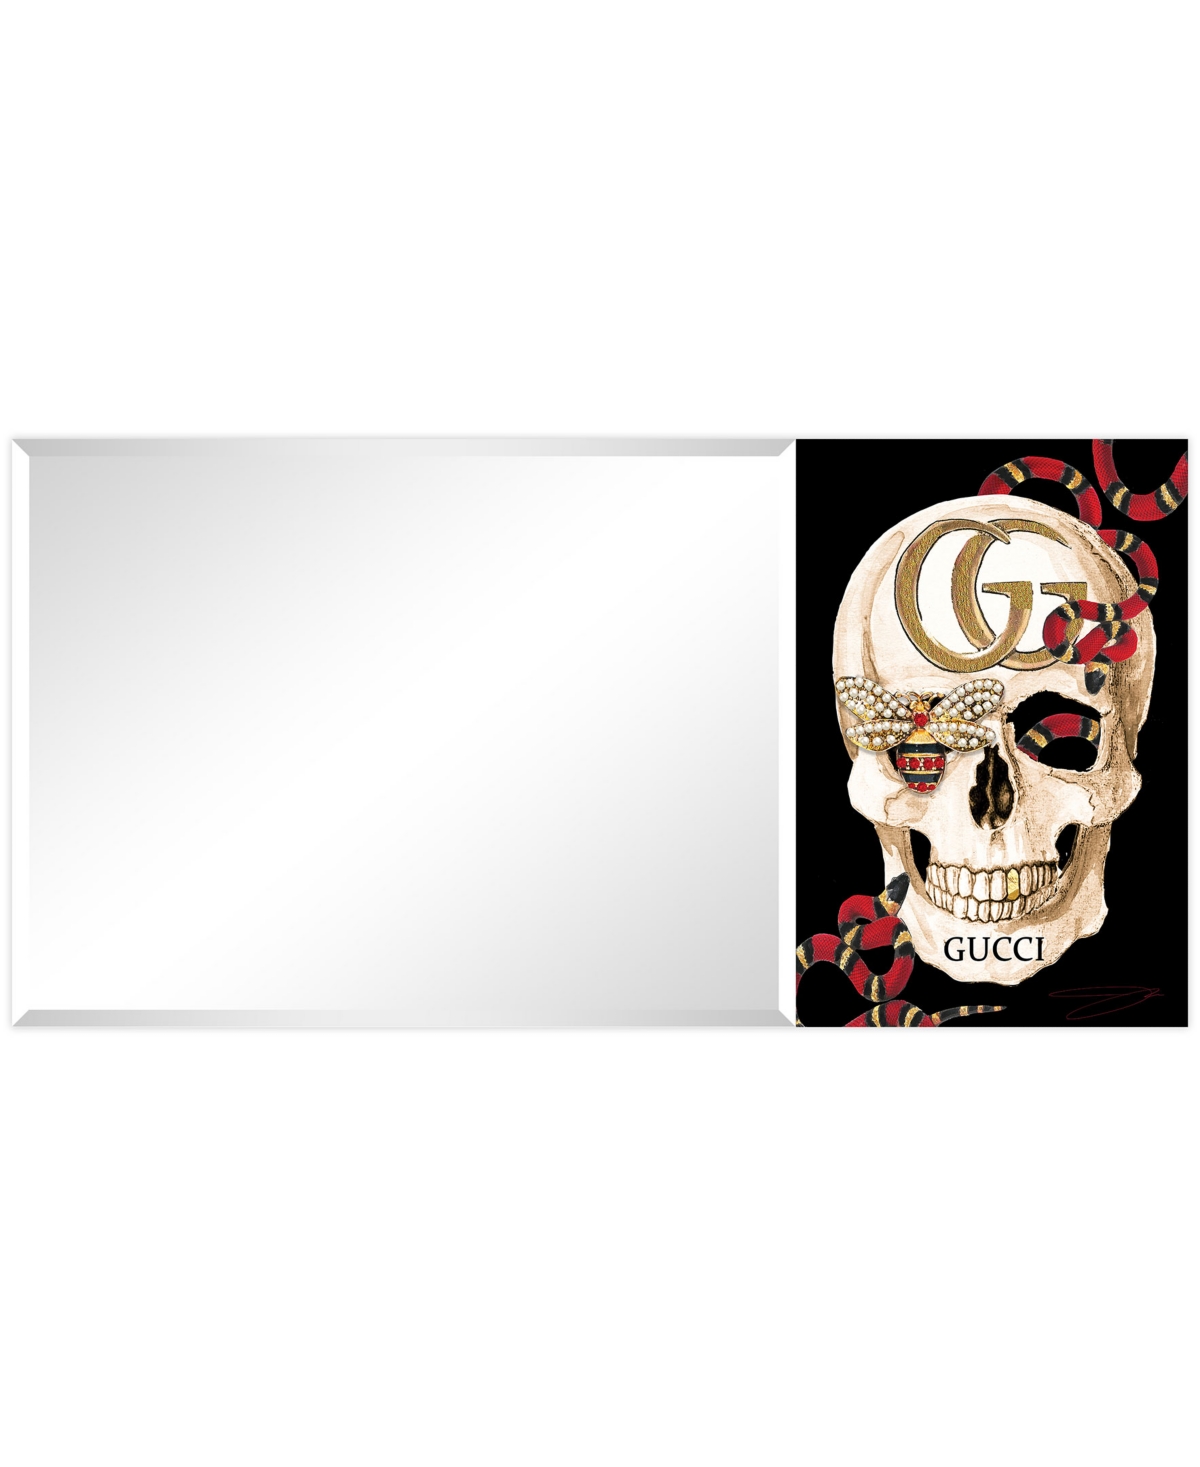 Empire Art Direct "gg Skull" Rectangular Beveled Mirror On Free Floating Printed Tempered Art Glass, 24" X 48" X 0.4" In Multi-color